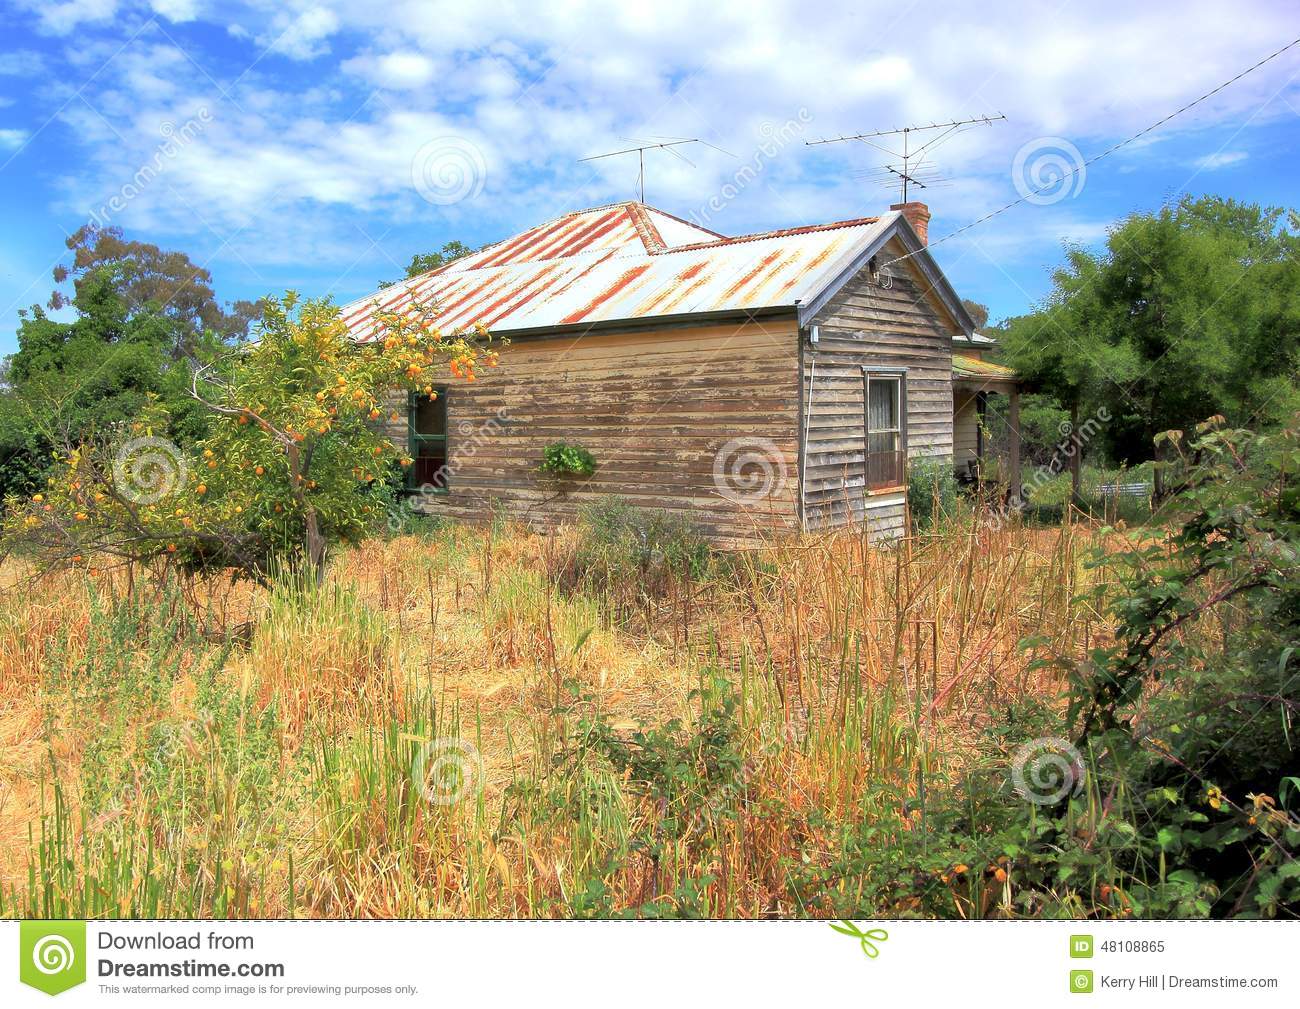 Old Run Down Country Wooden House In An Over Grown Bush Rural Setting    